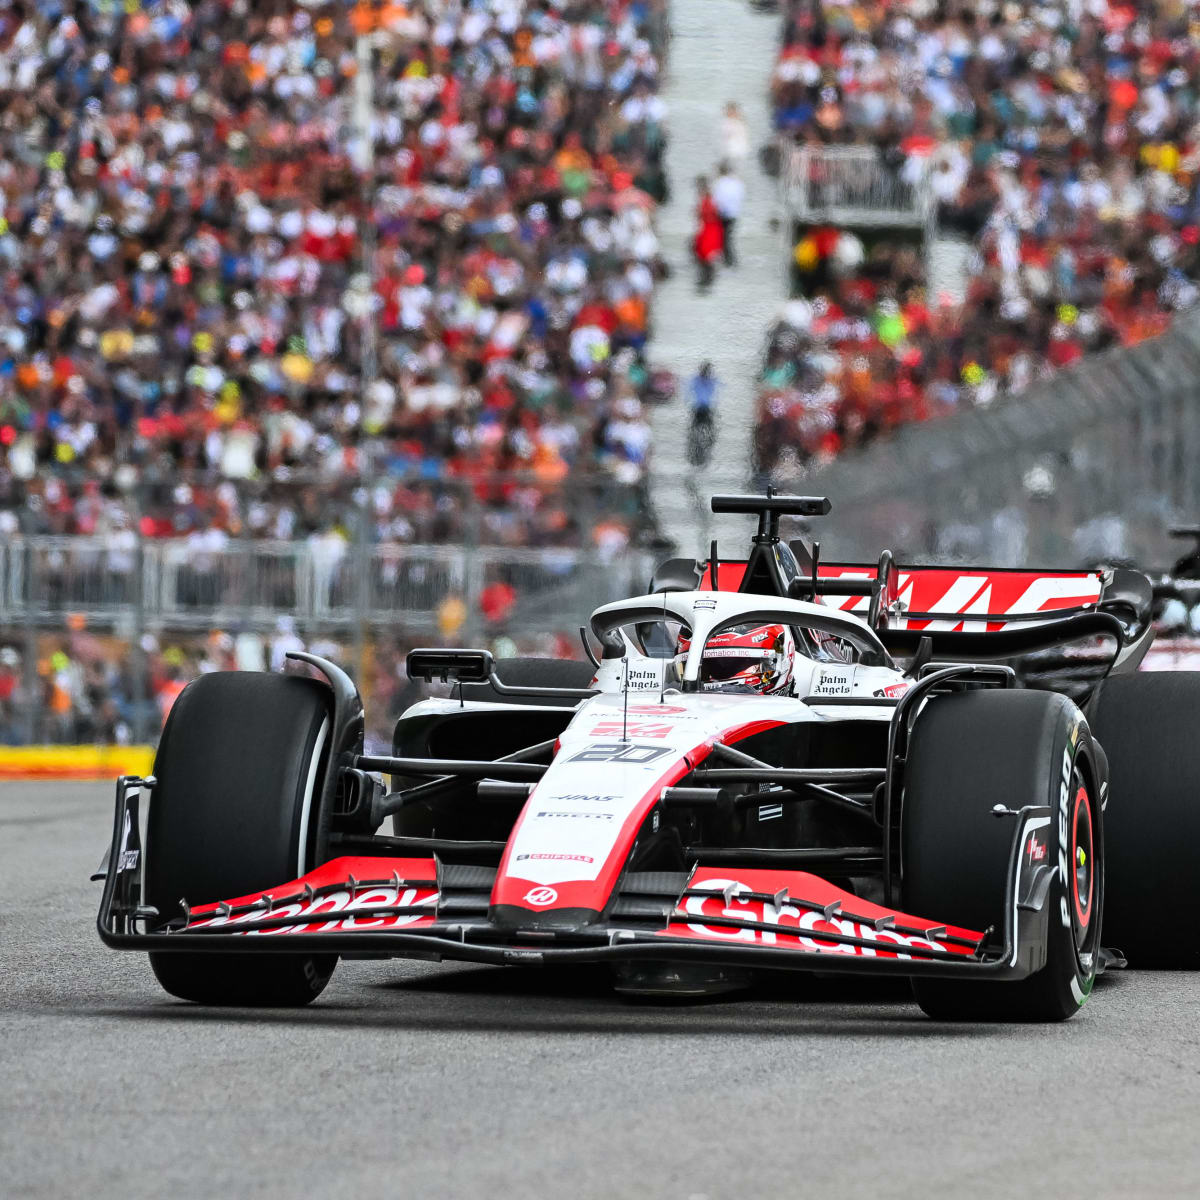 Why Haas F1 Team Is Biggest Surprise after the First Race of the